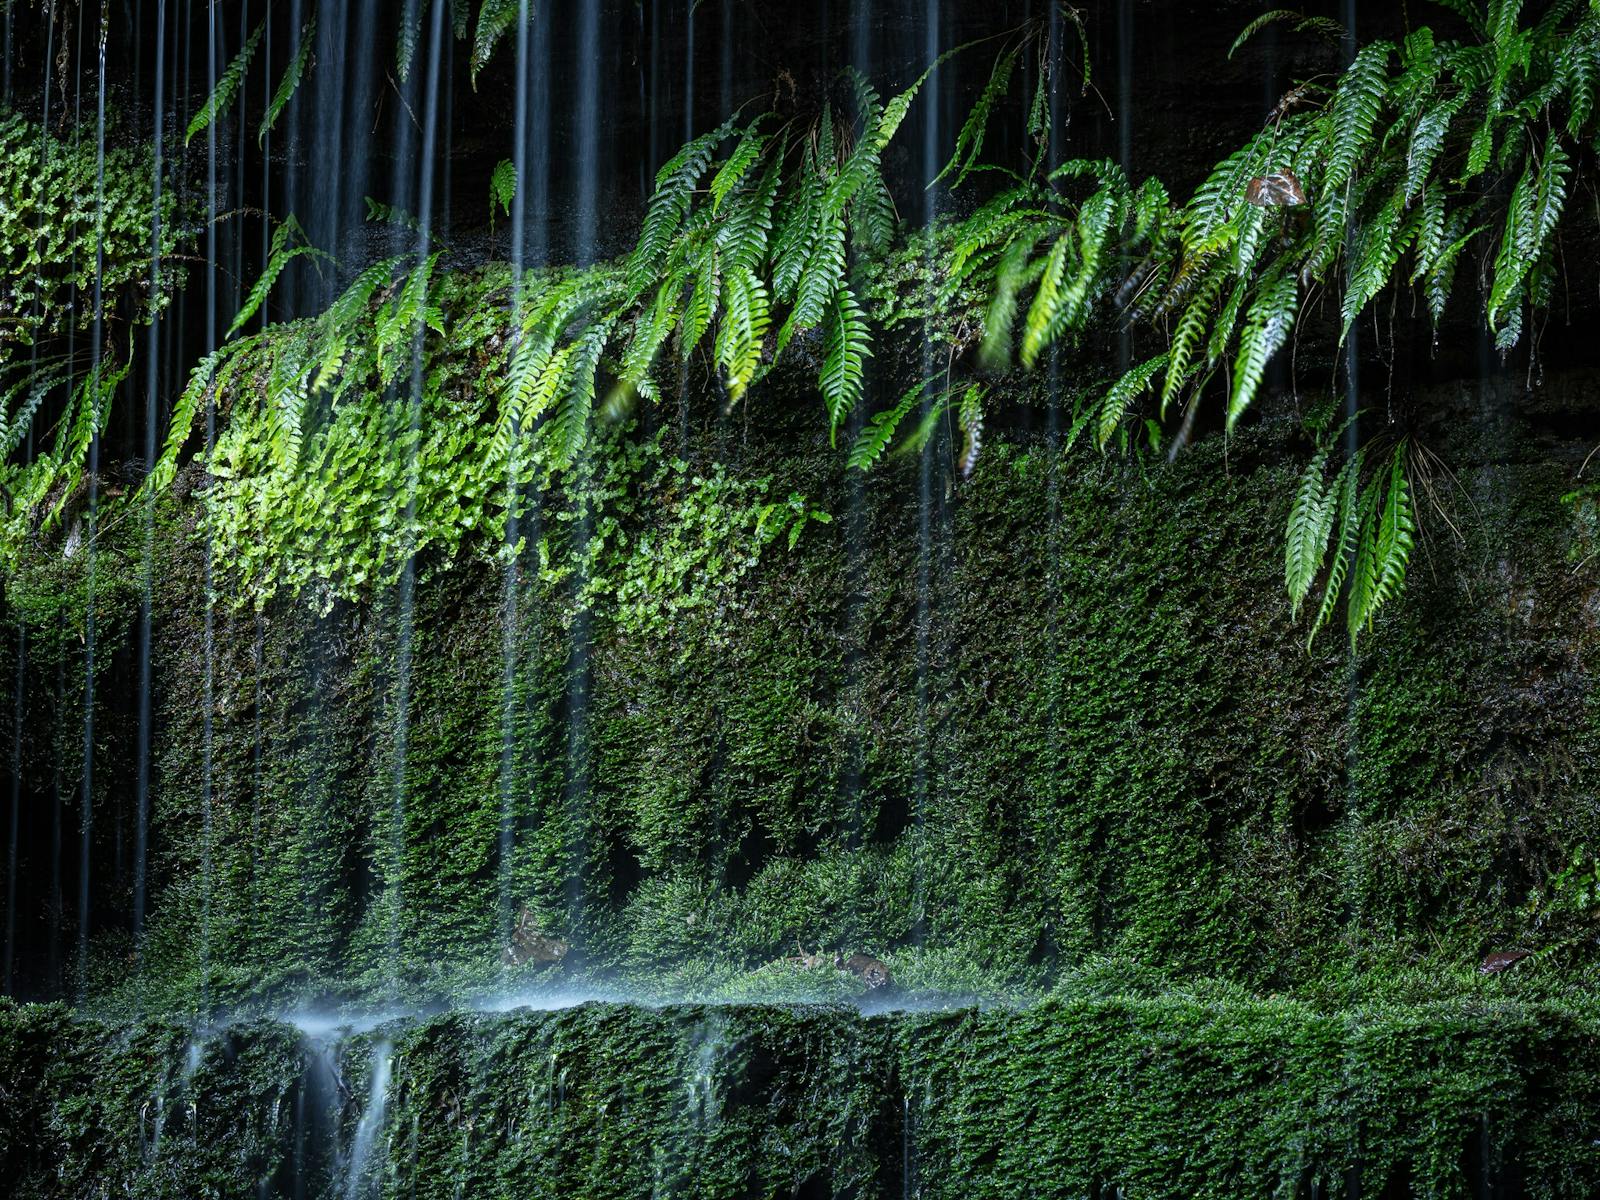 Ferns and other lush plants growing on the waterfall wall, with droplets of water streaming in front